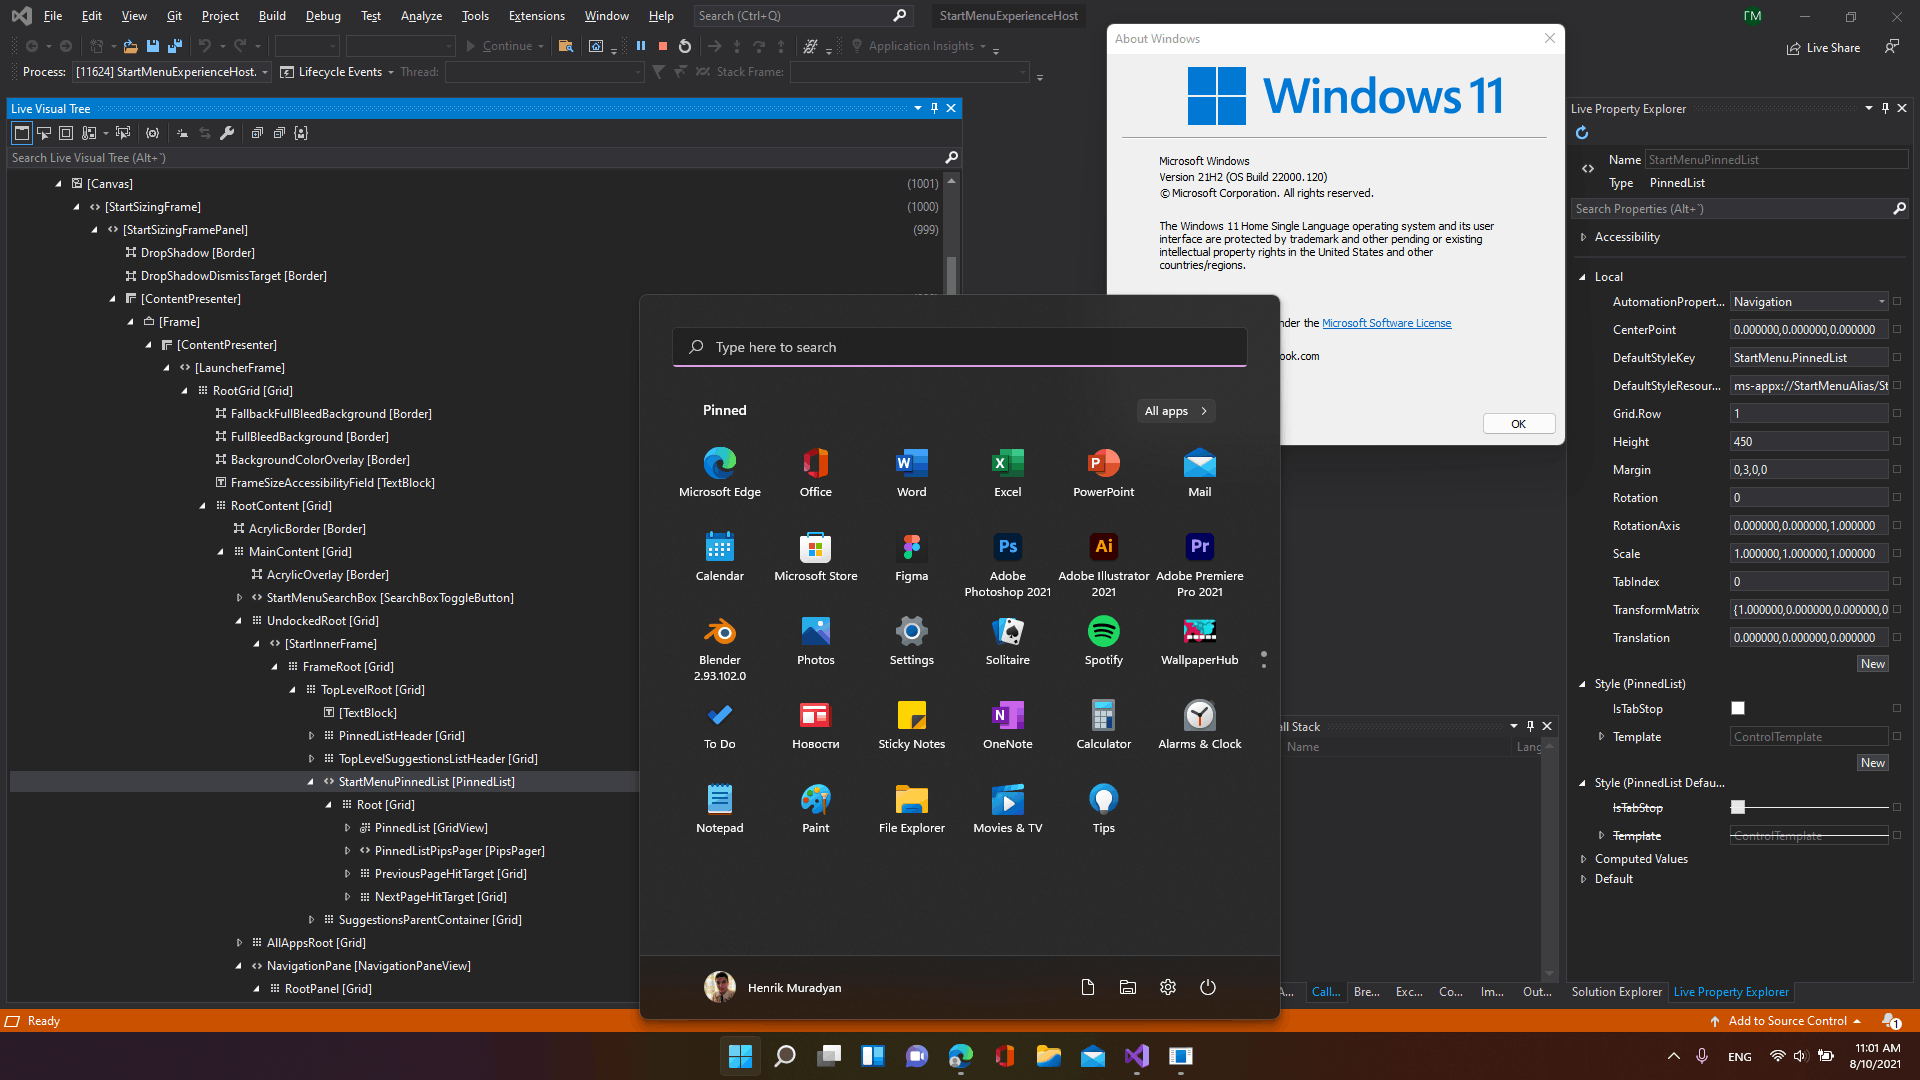 Disable The Recommended Section In Windows 11 Start Menu